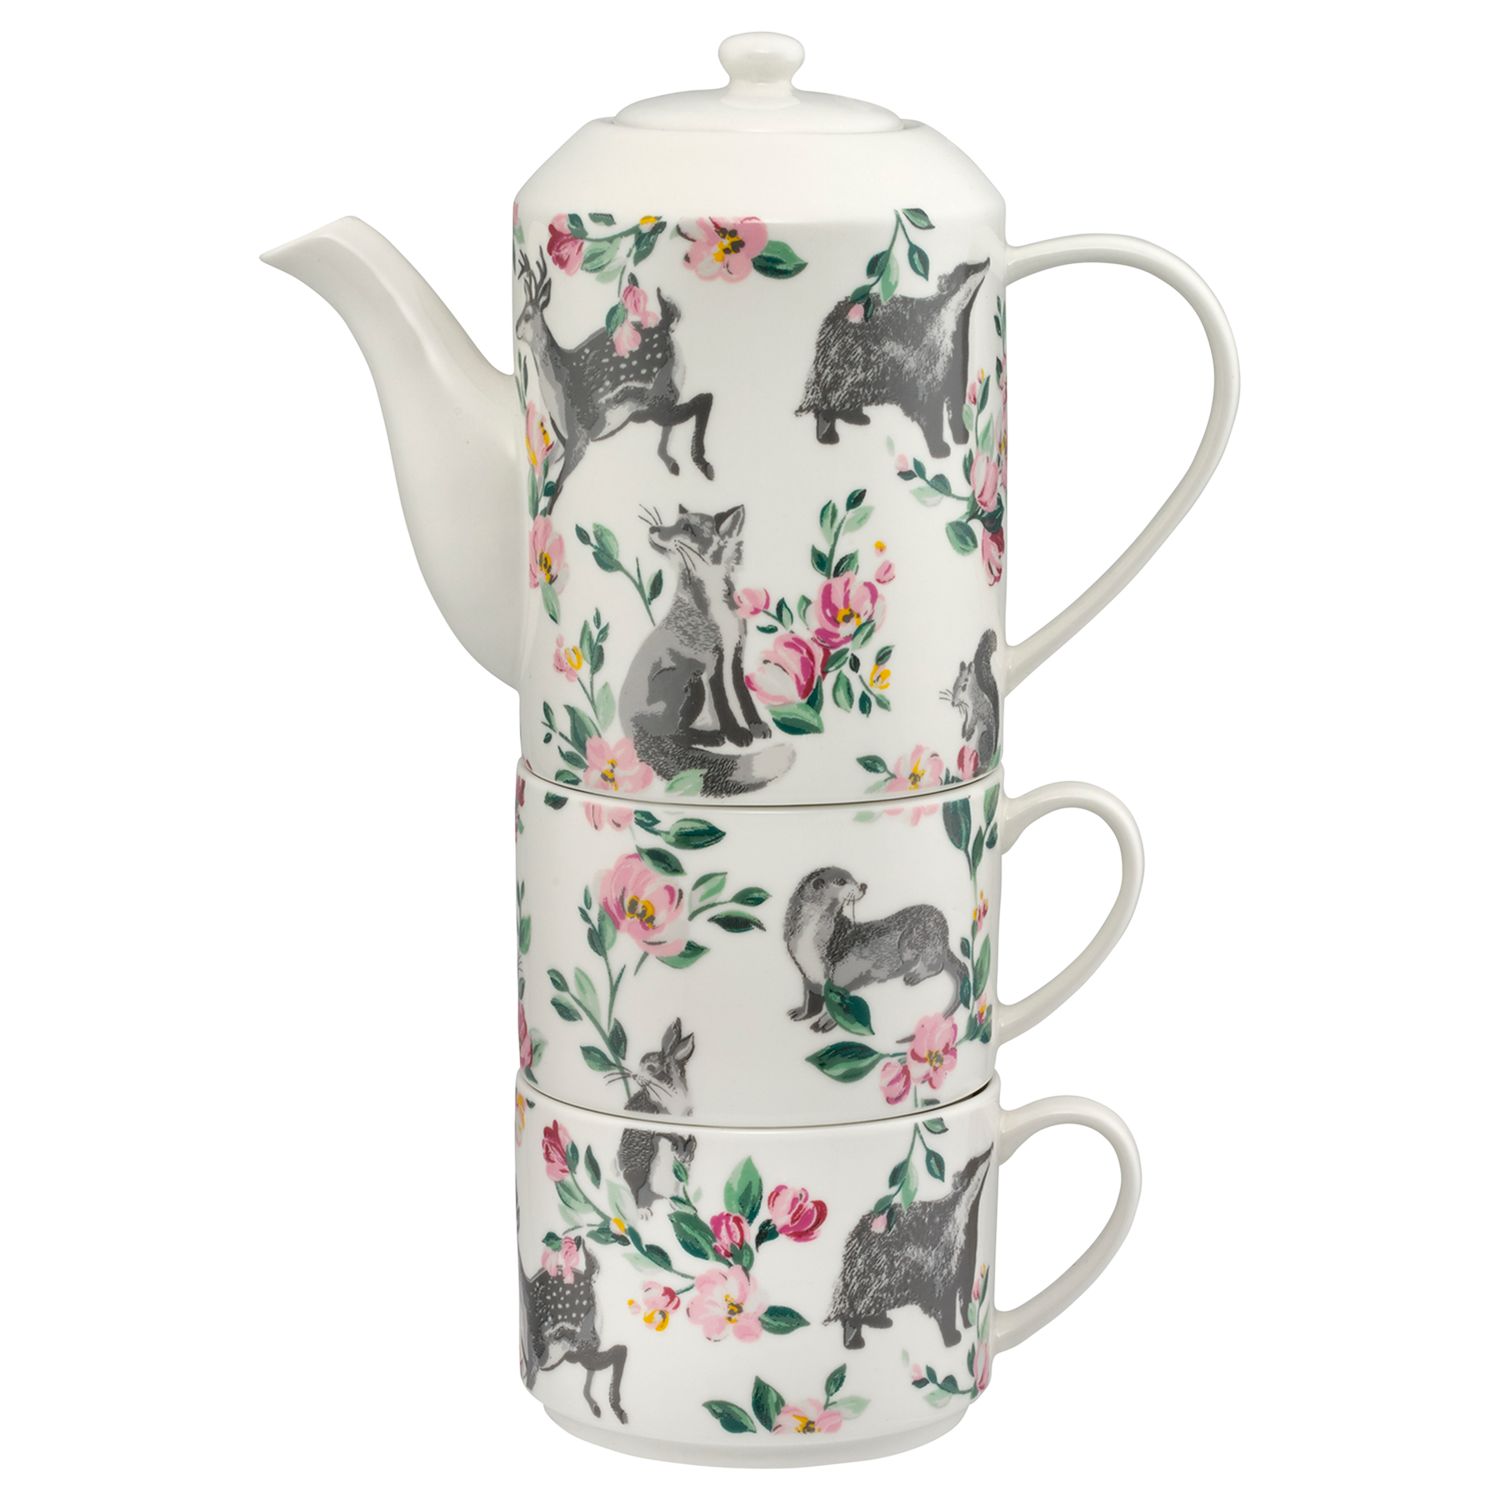 Cath Kidston Badger and Friends Tea for 